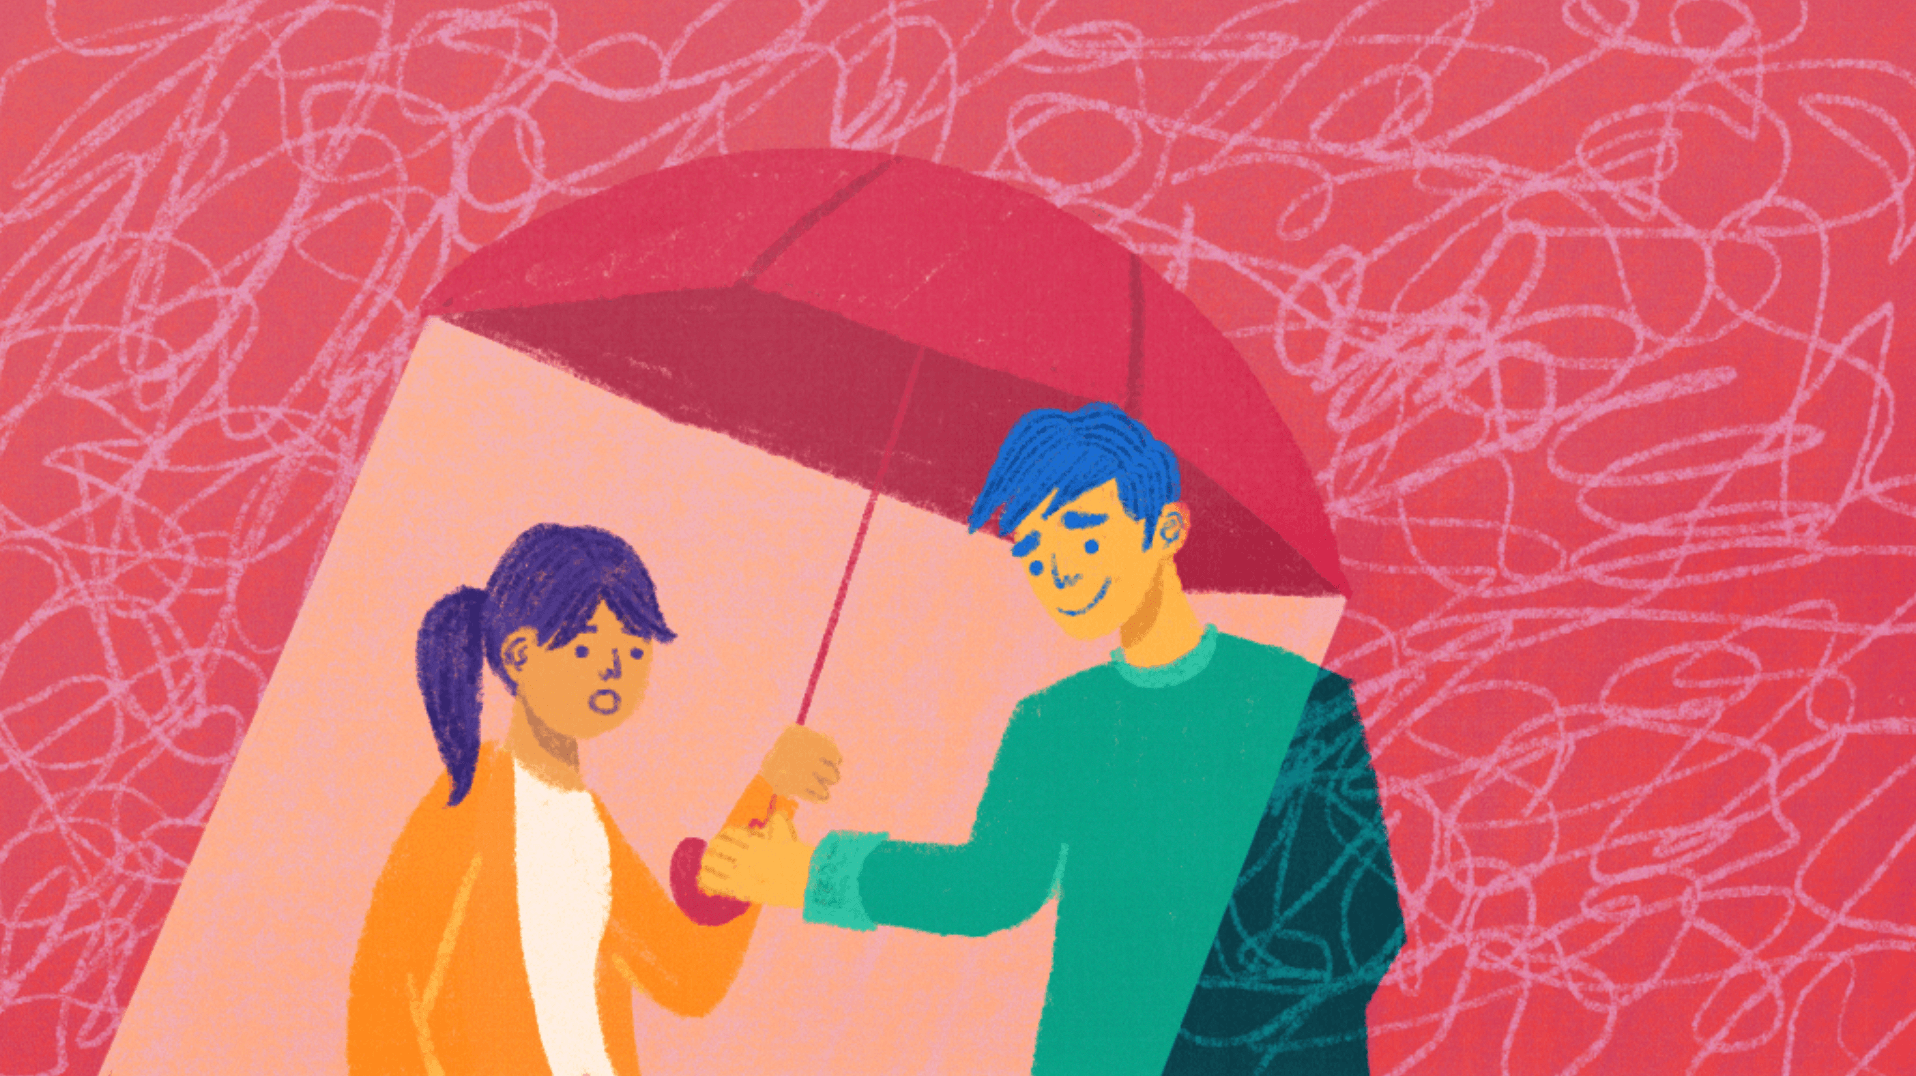 Worth the work: A psychologist’s guide to dating while living with mental illness